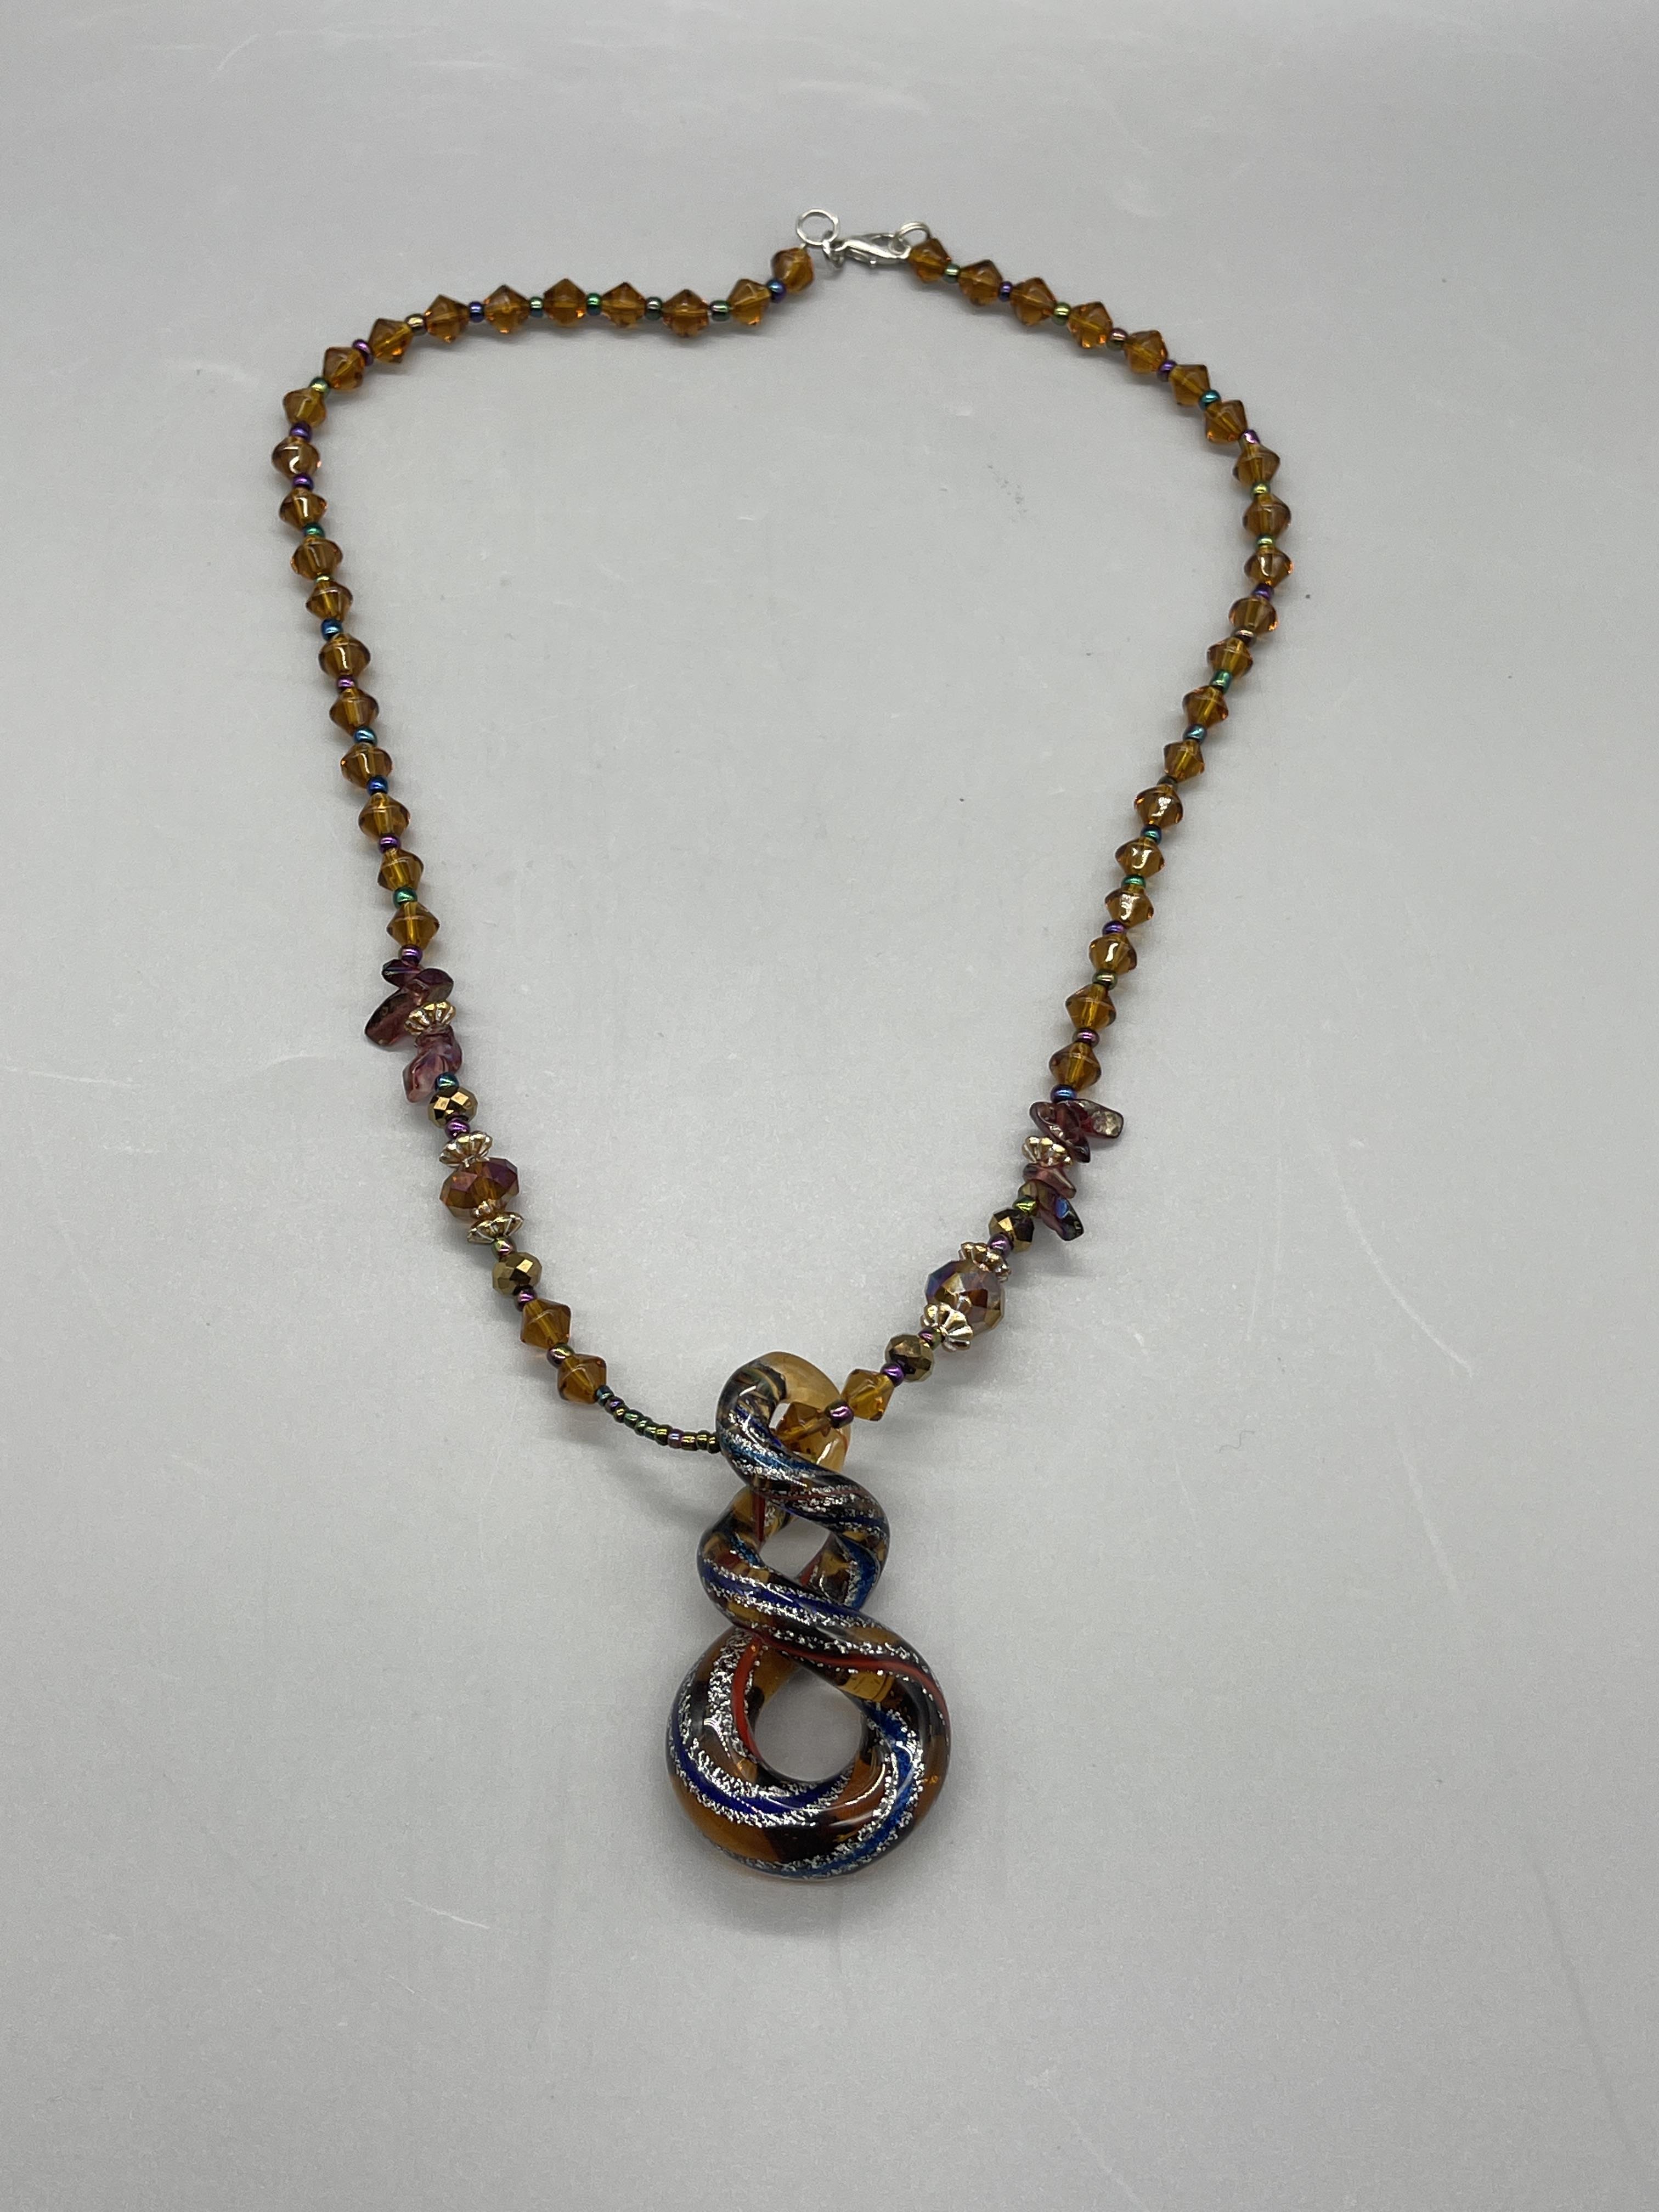 MURANO Unusual blown glass necklace - Image 6 of 6